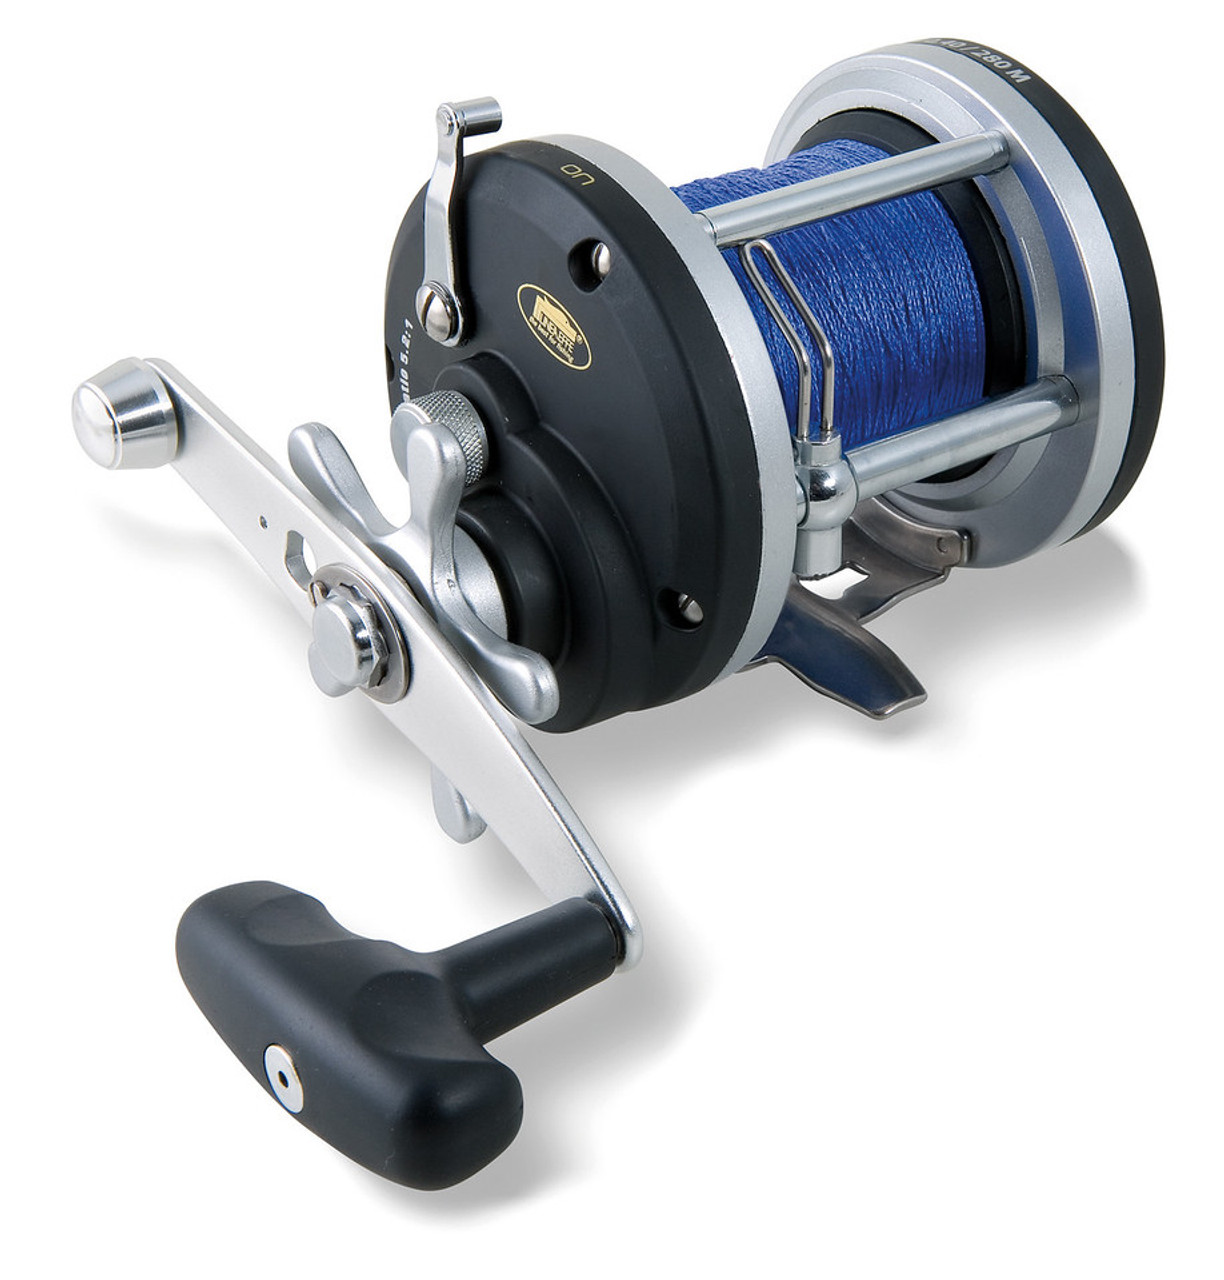 2 X LARGE SEA FISHING REELS LINEAEFFE SILK 70 REELS WITH 20LB LINE